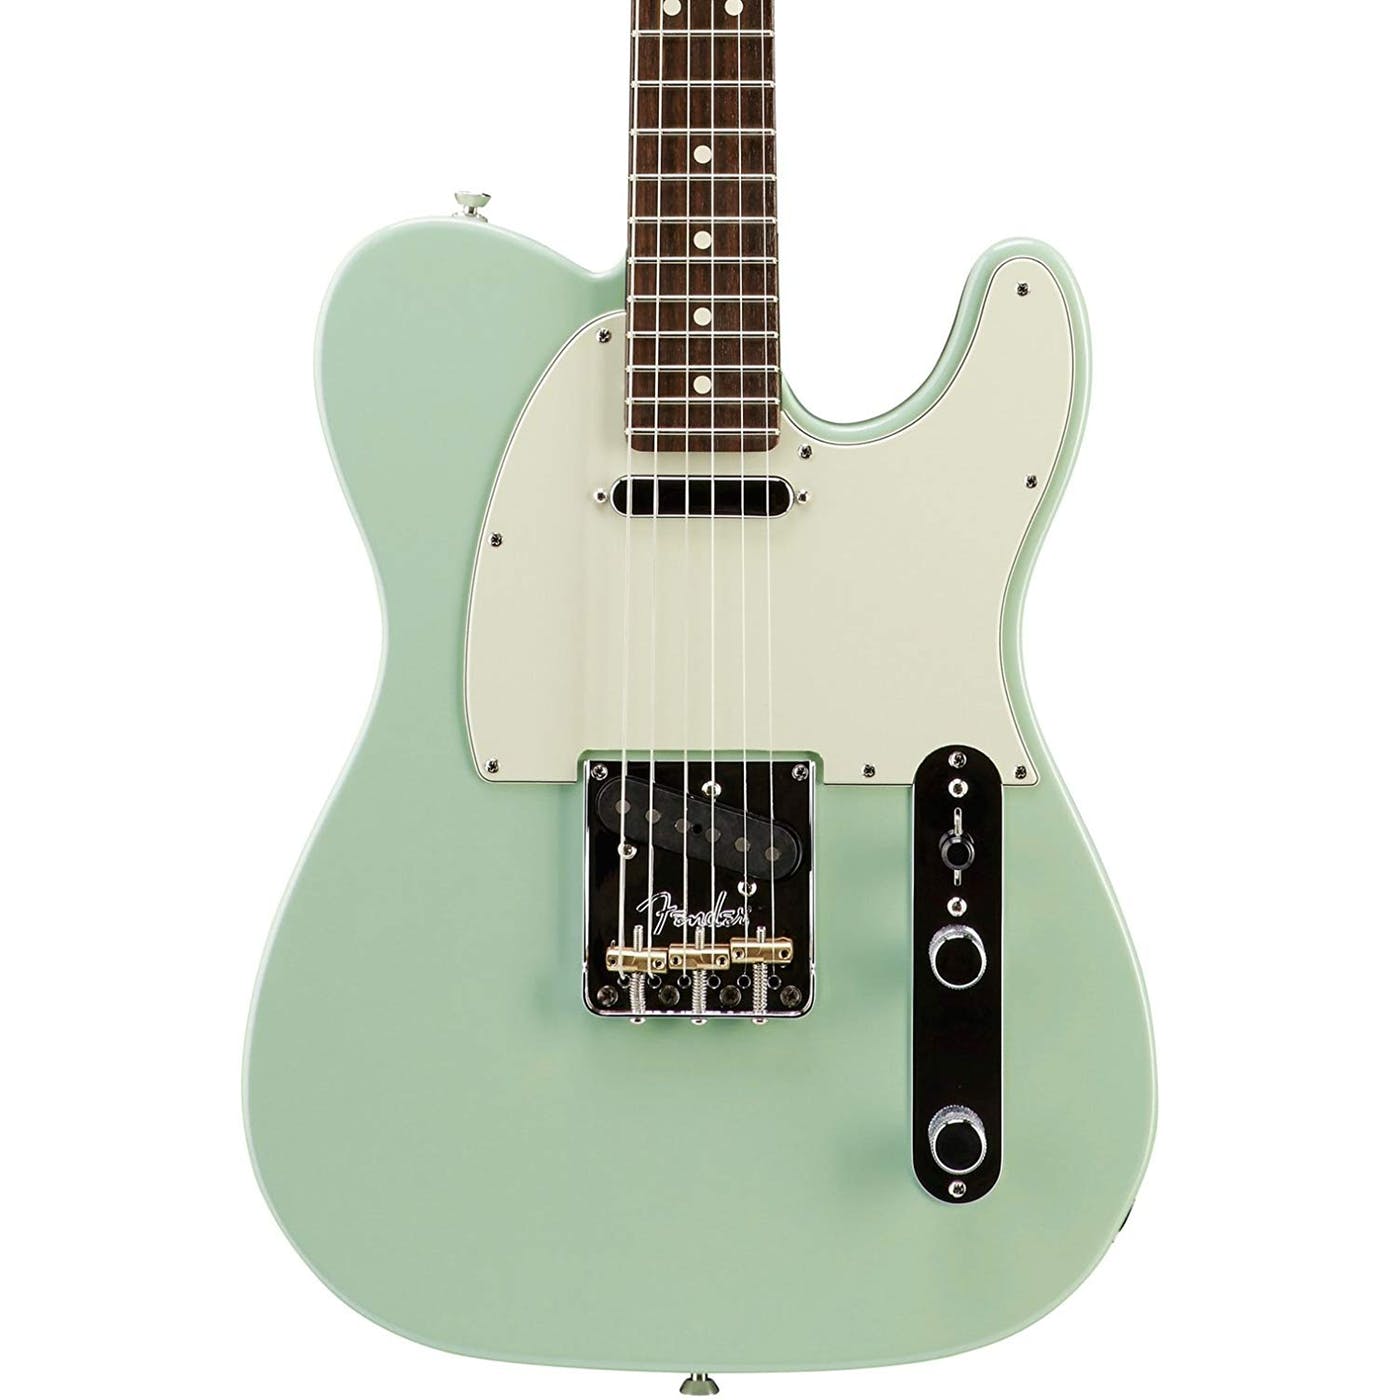 Fender-FSR-Limited-Edition-American-Professional-Telecaster-in-Surf-Green-with-Rosewood-NeckFender-FSR-Limited-Edition-American-Professional-Telecaster-in-Surf-Green-with-Rosewood-Neck